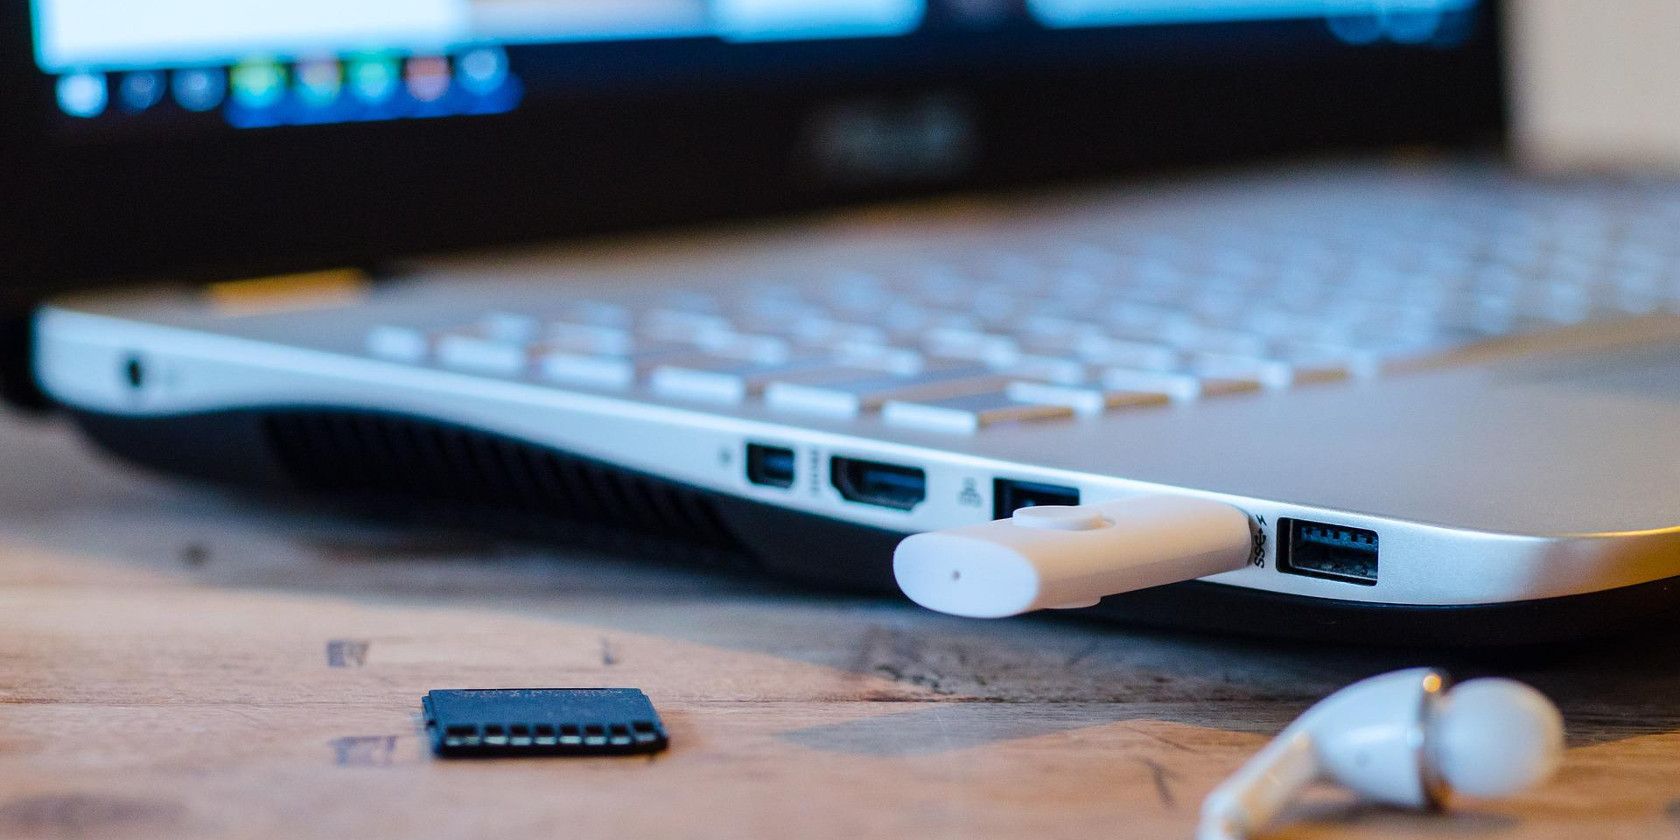 5 Ways to View the USB Device History in Windows